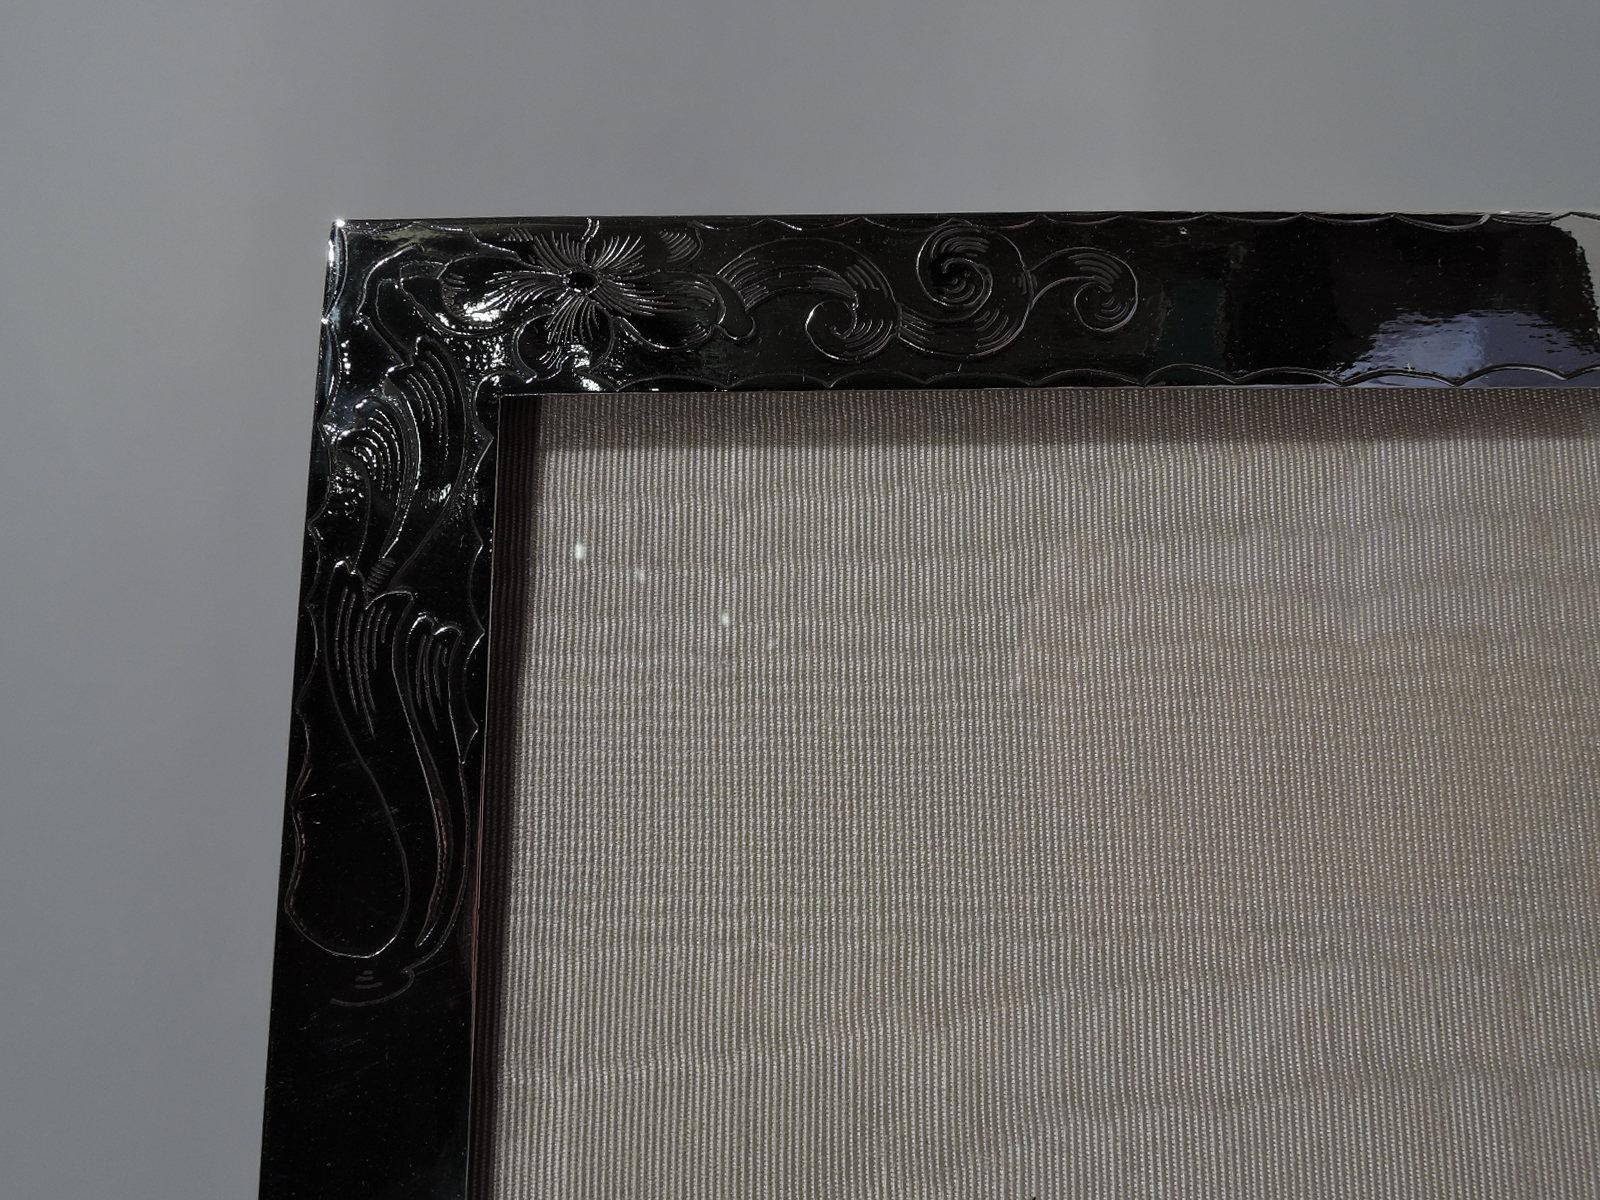 Turn-of-the-century American Art Nouveau sterling silver picture frame. Rectangular window in flat surround. Loose and fluid acid-etched scrolls and flowers between wave borders. With glass, silk lining, and velvet back and hinged support for